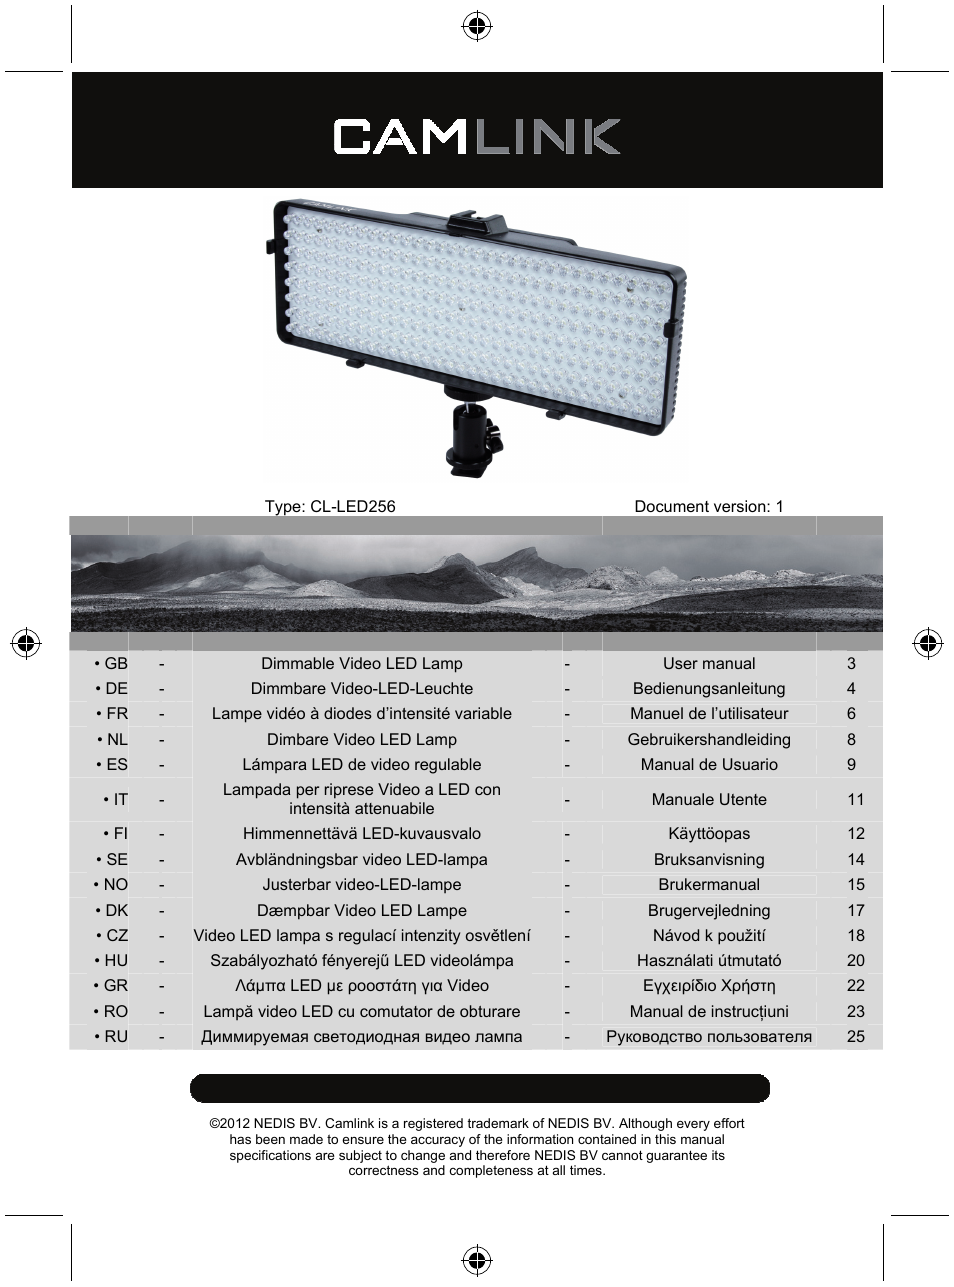 Dimmable video LED lamp 256 LEDs